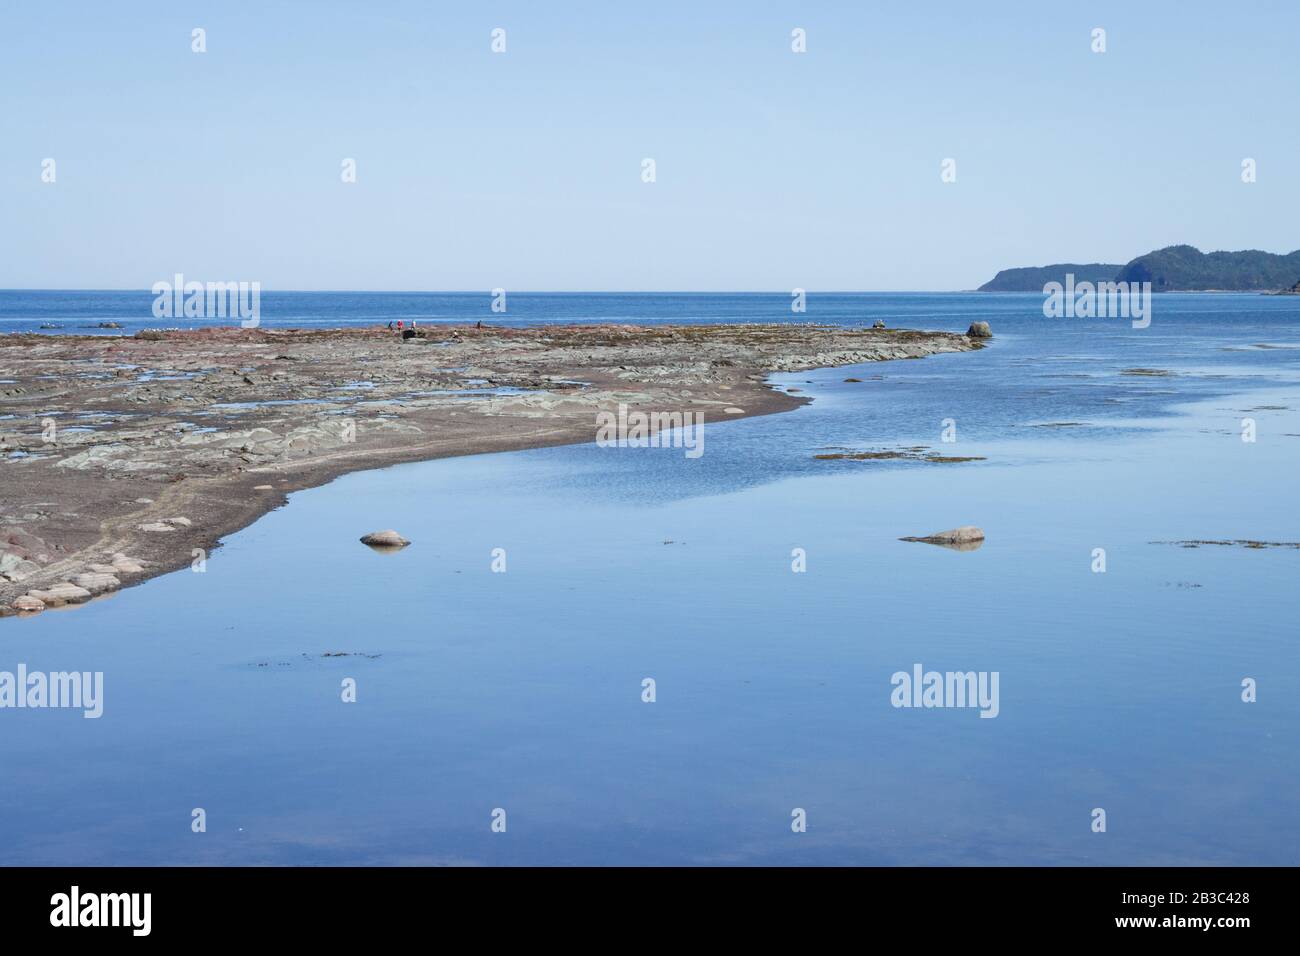 Anse Mercier cove at Bic national park, Quebec, Canada on the shore of Saint Lawrence river Stock Photo